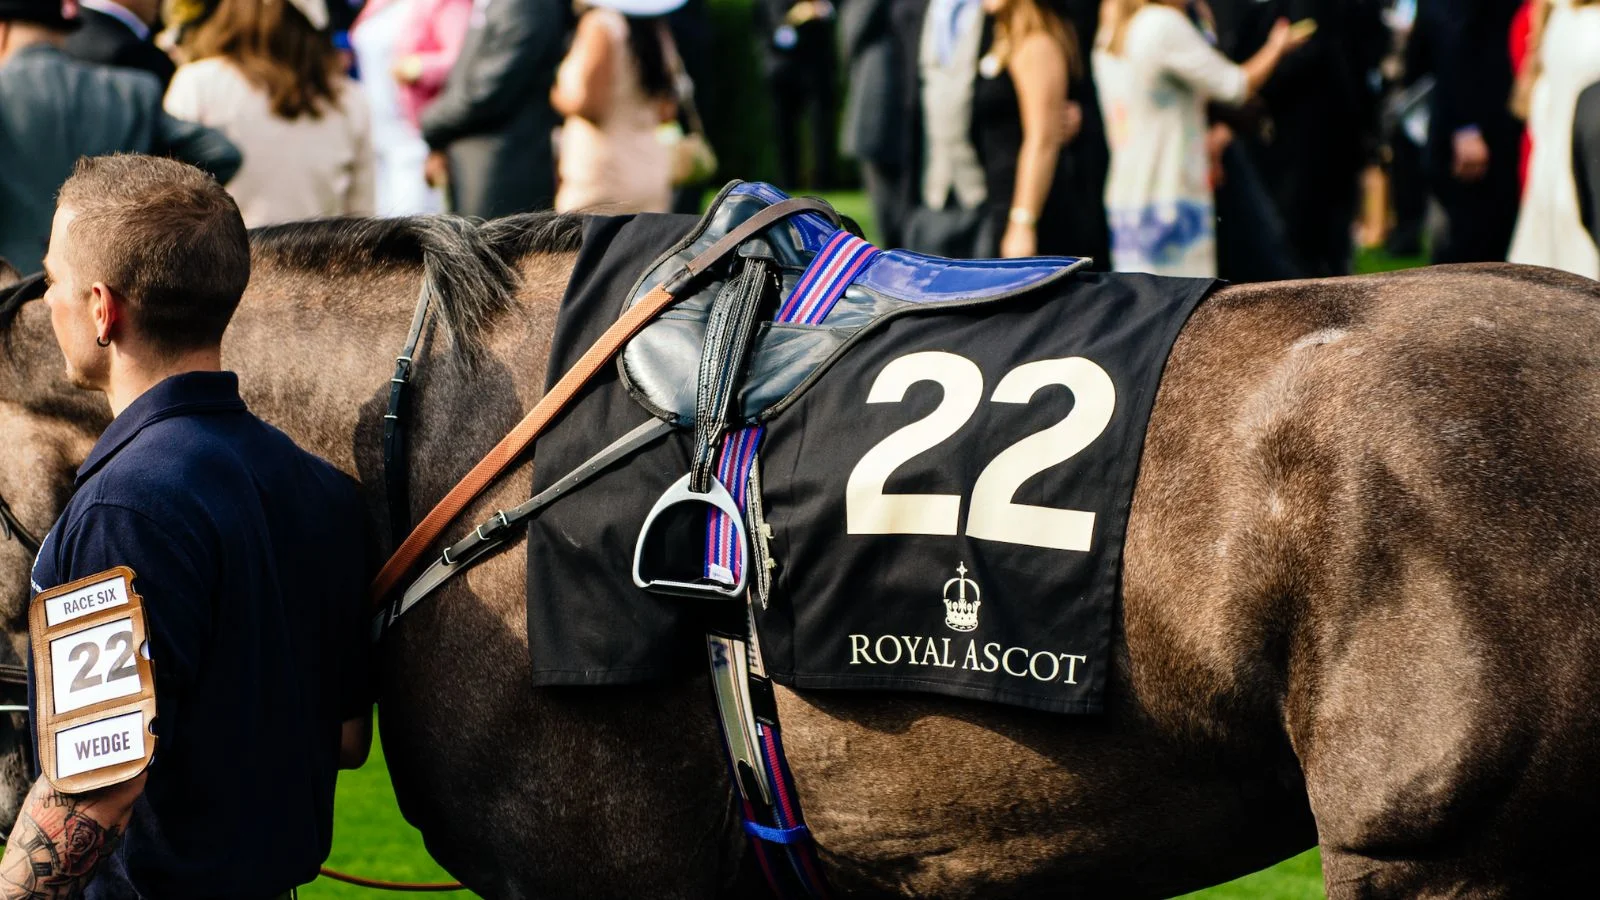 Royal Ascot is one of the biggest horse racing betting events of the year in the UK.